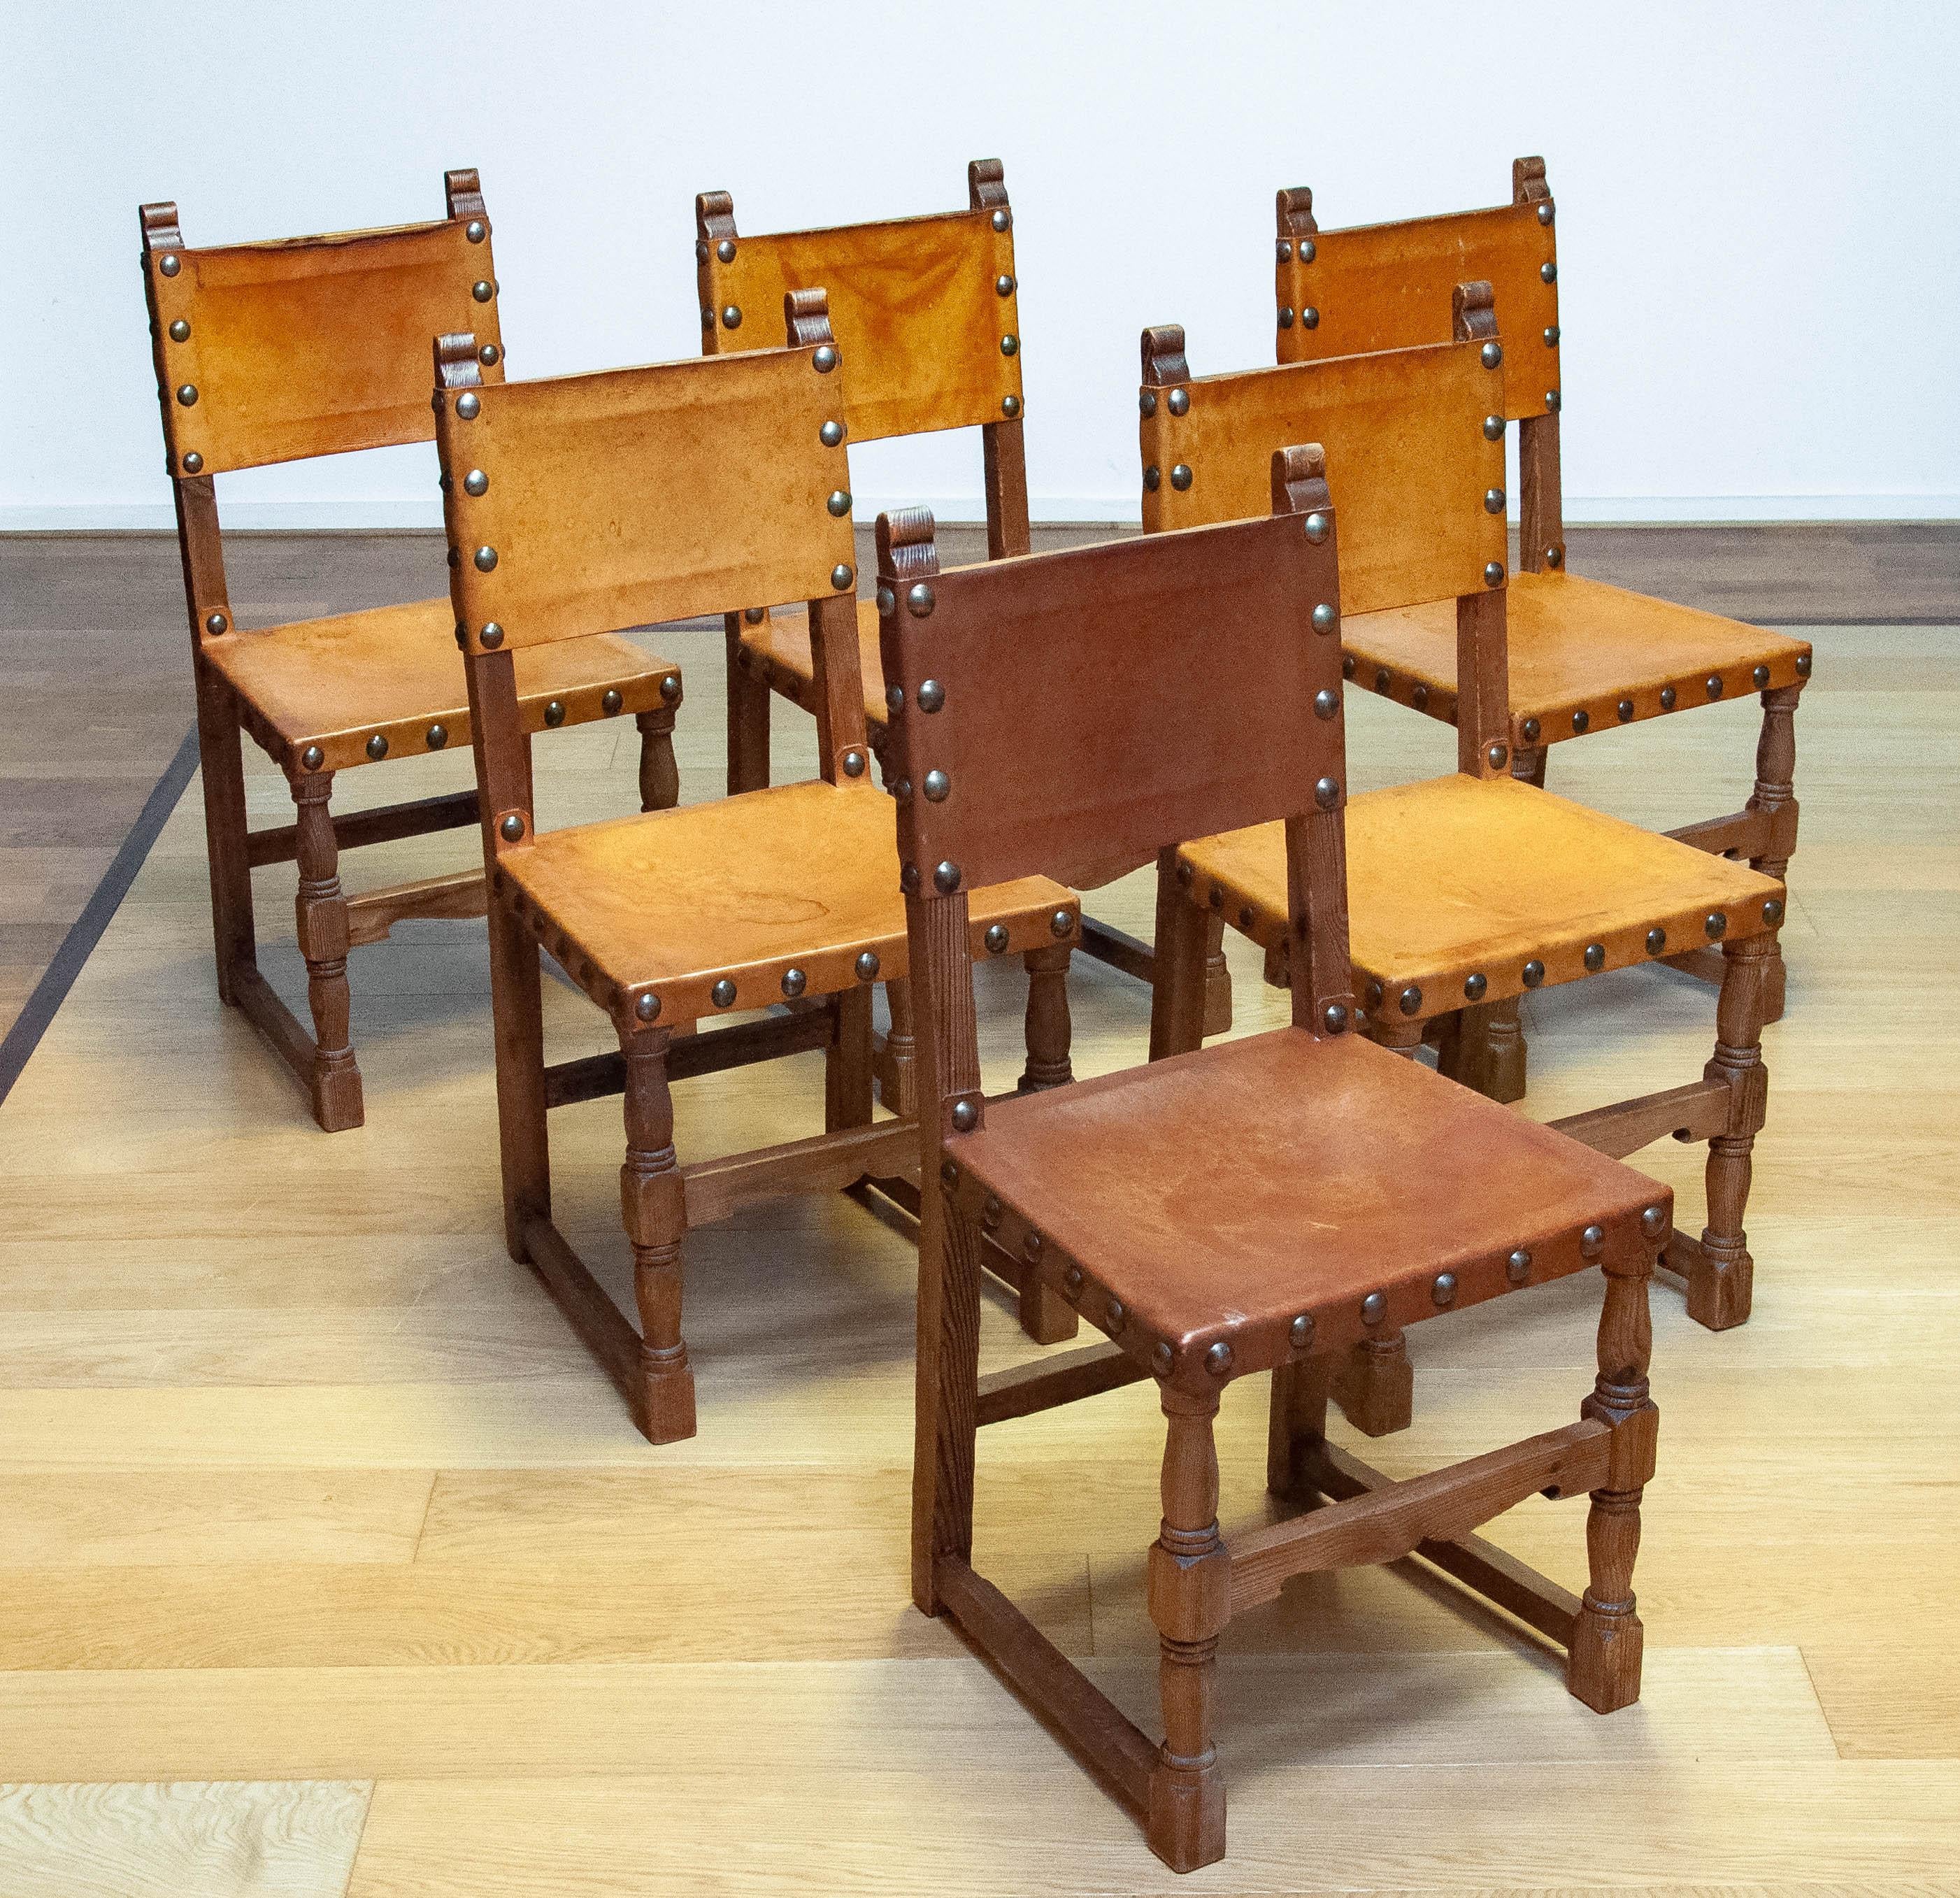 Late 19th Century 6 Antique Swedish Folk Art Farm County Dining Chairs In Pine And Tan Leather For Sale